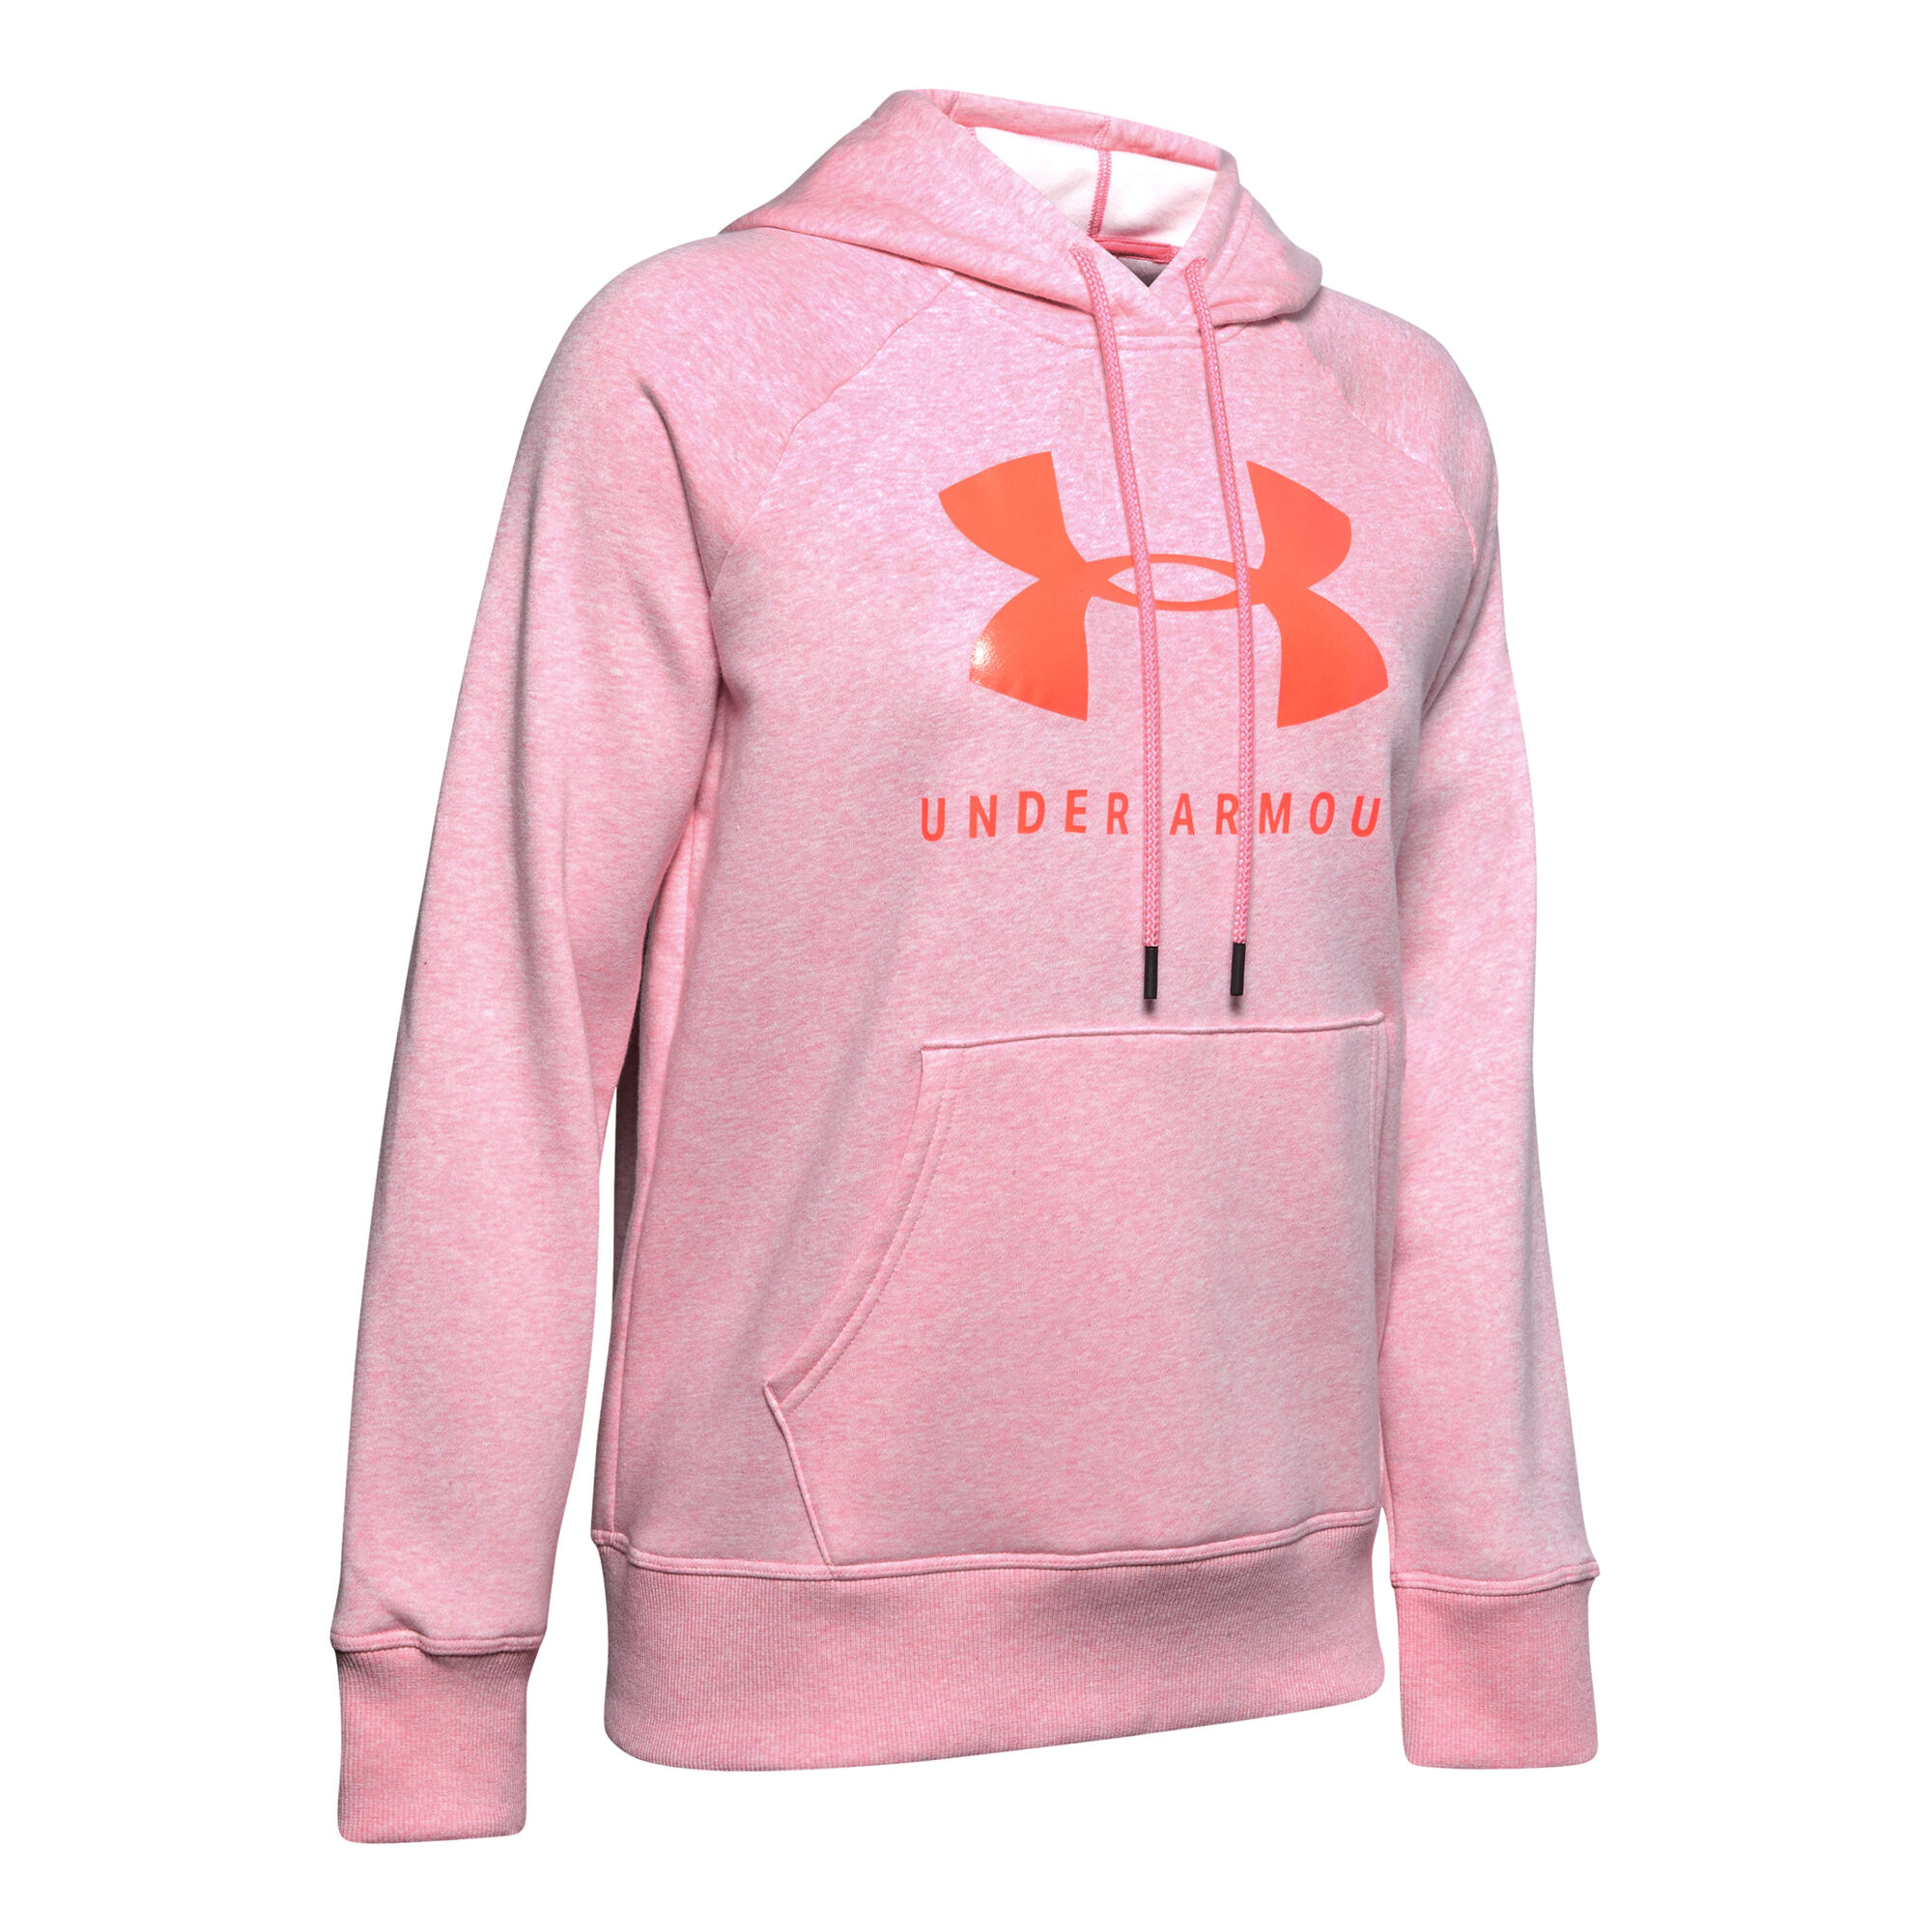 Sudadera Under Armour Funnel Neck mujer